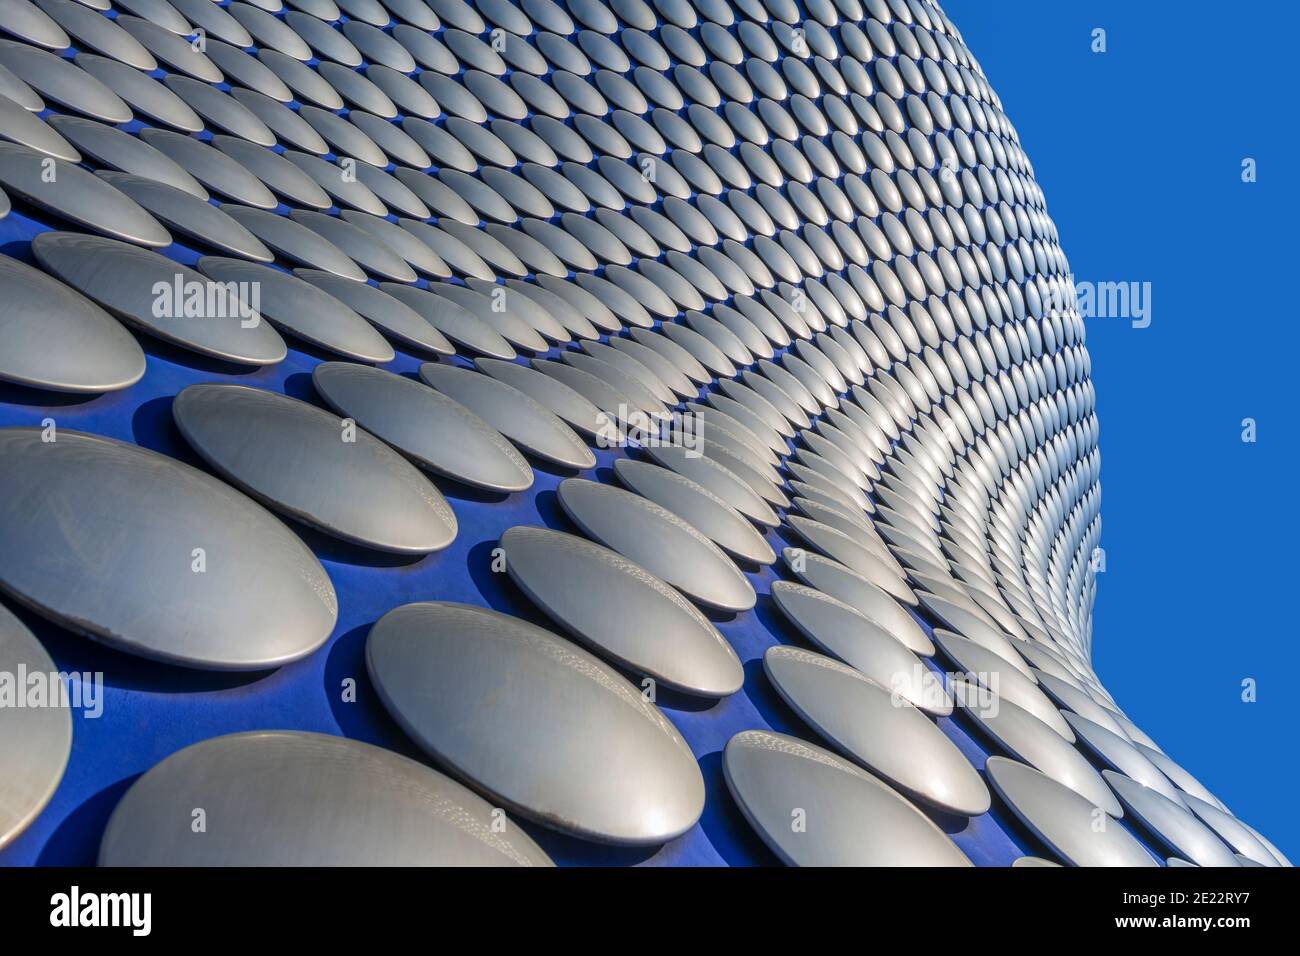 The Selfridges building is part of the famous Bullring Shopping Centre and houses the Selfridges Department Store. It was designed by Future Systems a Stock Photo